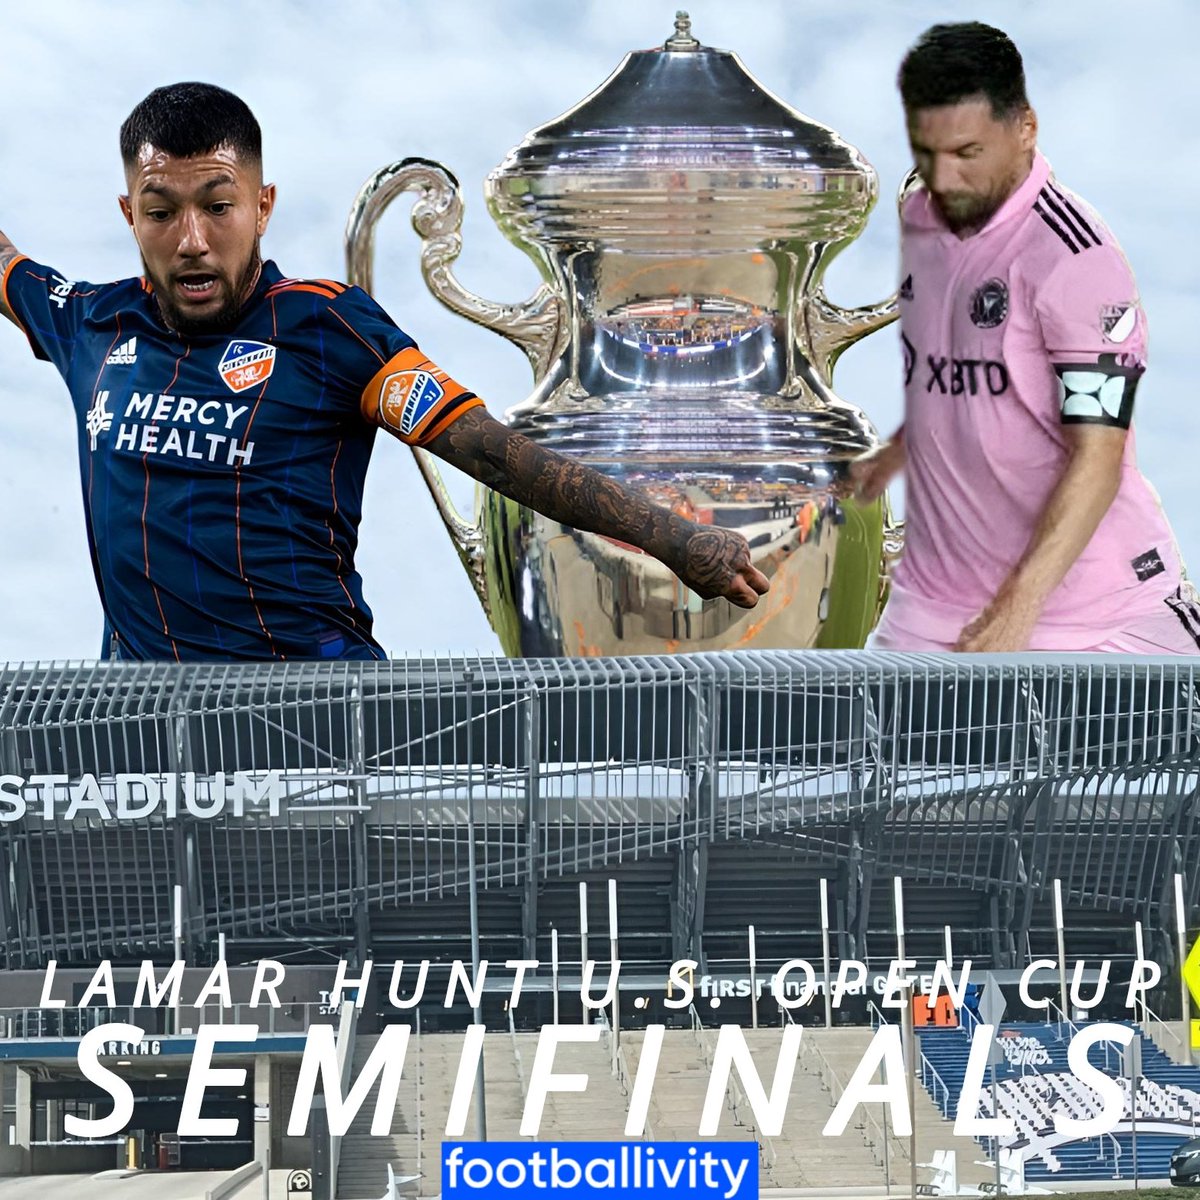 THE US OPEN CUP SEMIS IS HERE JOIN OUR DISCORD to chat: discord.gg/Fr3jR353Jb #AllForCincy | #InterMiamiCF | #CINMIA | #CINvMIA | #CINvsMIA | #FCC | #IMCF | #FCCincinnati | #InterMiami | #Messi𓃵 | #MessiDay | #Messi | #USOC | #USOC2023 | #USOC23 | #USOpenCup | #UnitedStates